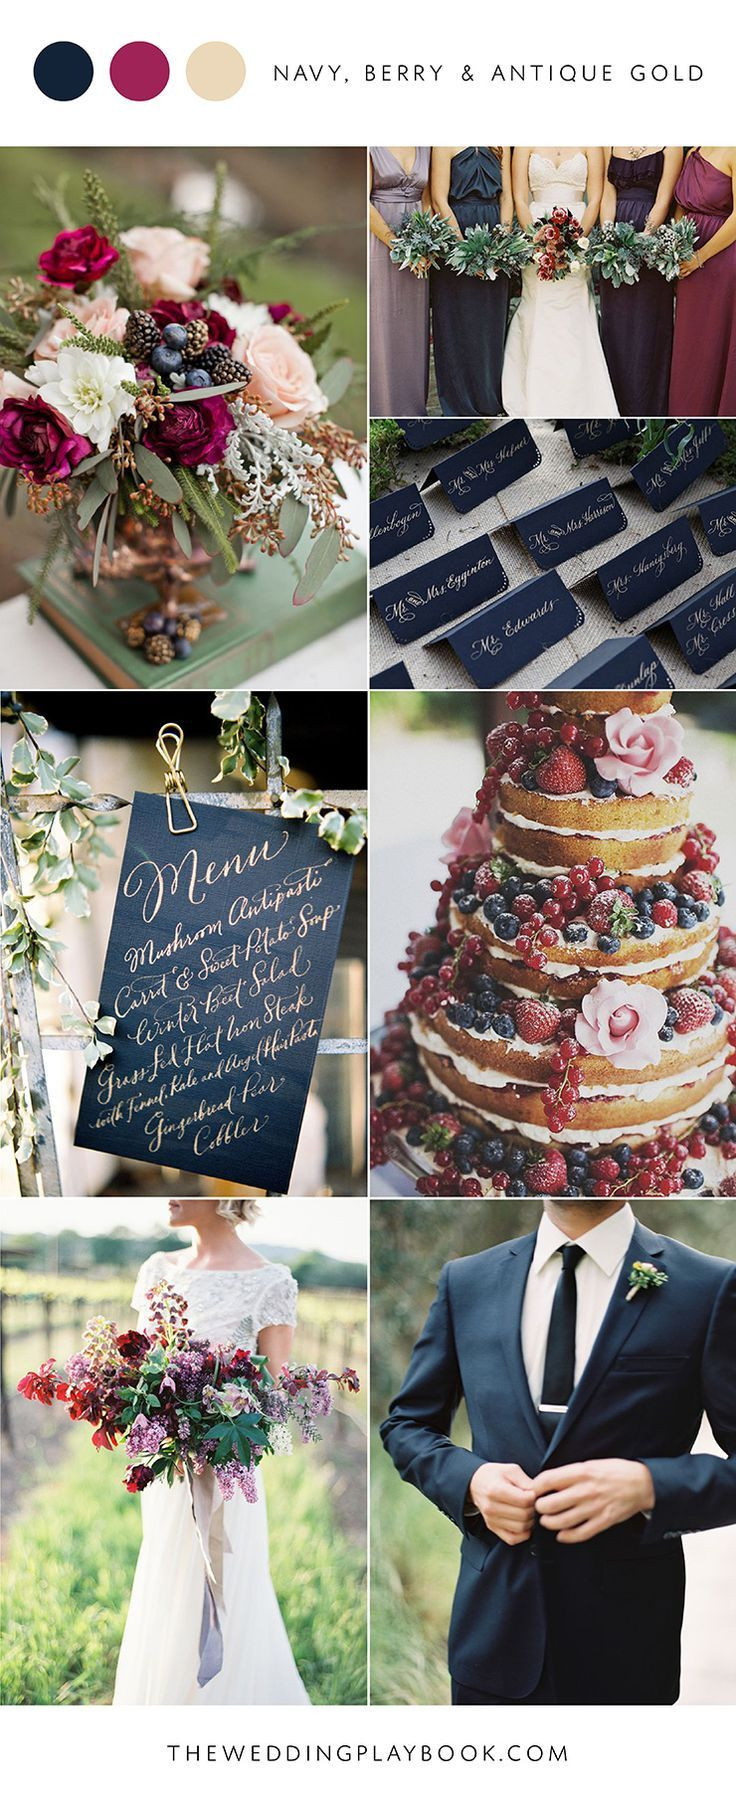 February Wedding Themes
 43 best fall in love images on Pinterest